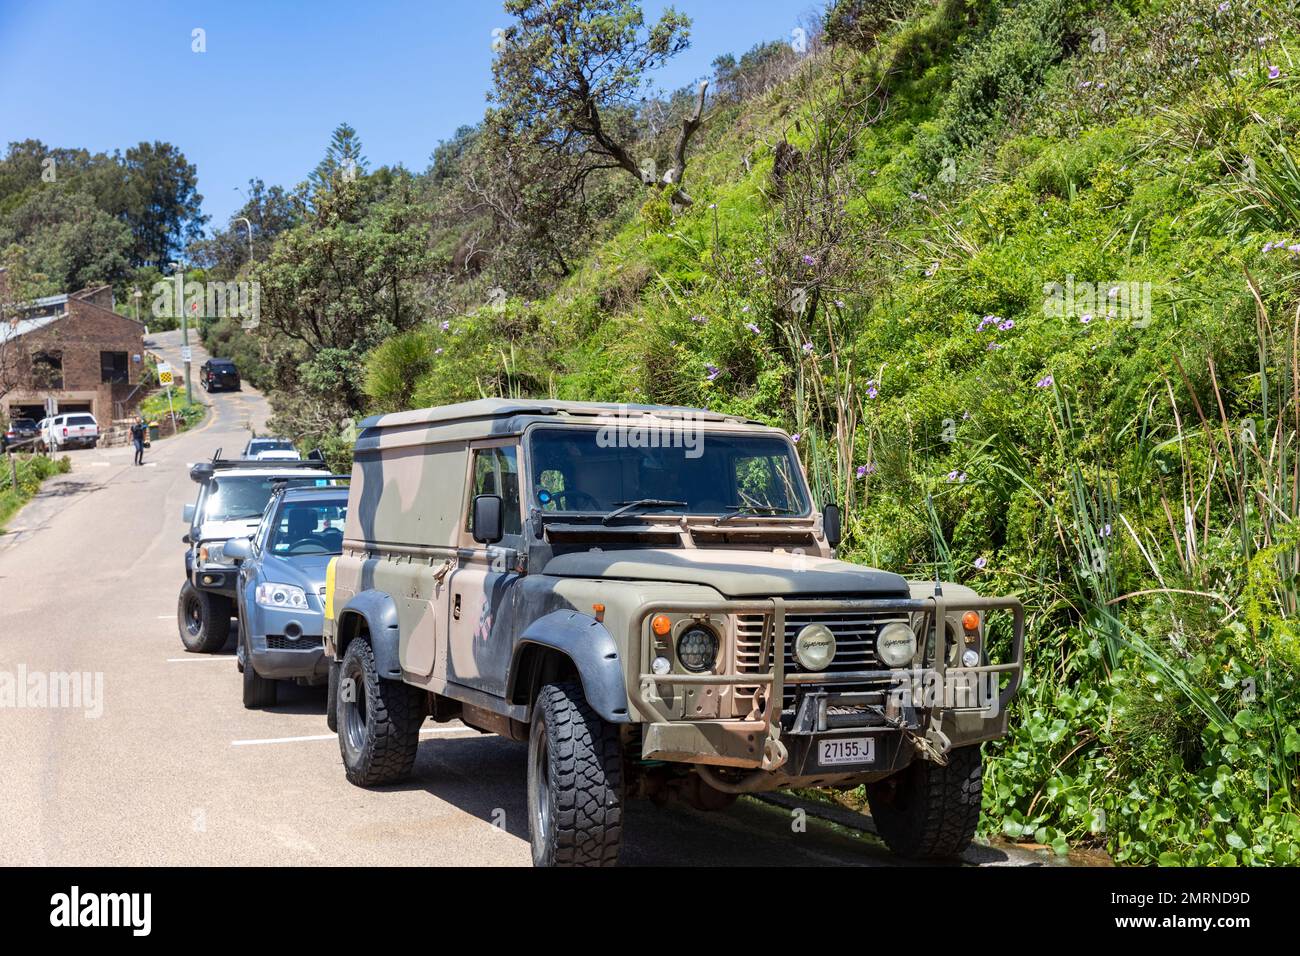 1989 model Land Rover Defender 110 in army colours parked at Warriewood beach in Sydney,NSW,Australia Stock Photo